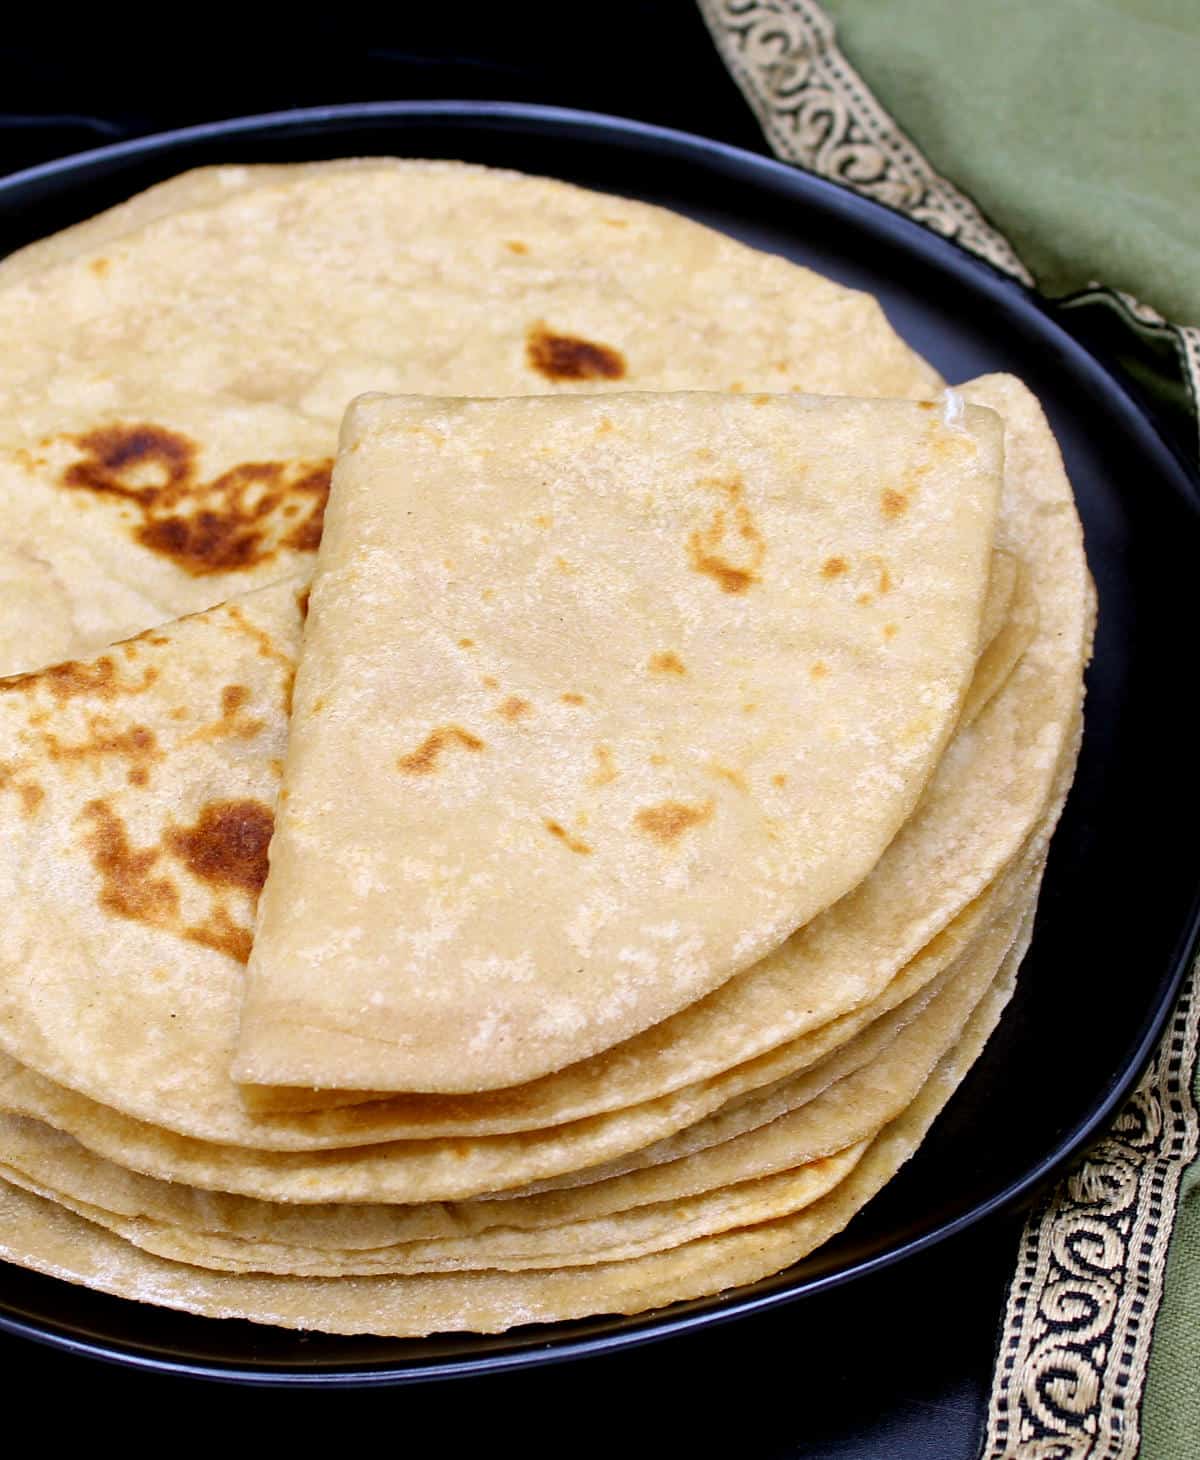 Front photo showing a roti folded over twice on a stack of rotis in black plate.